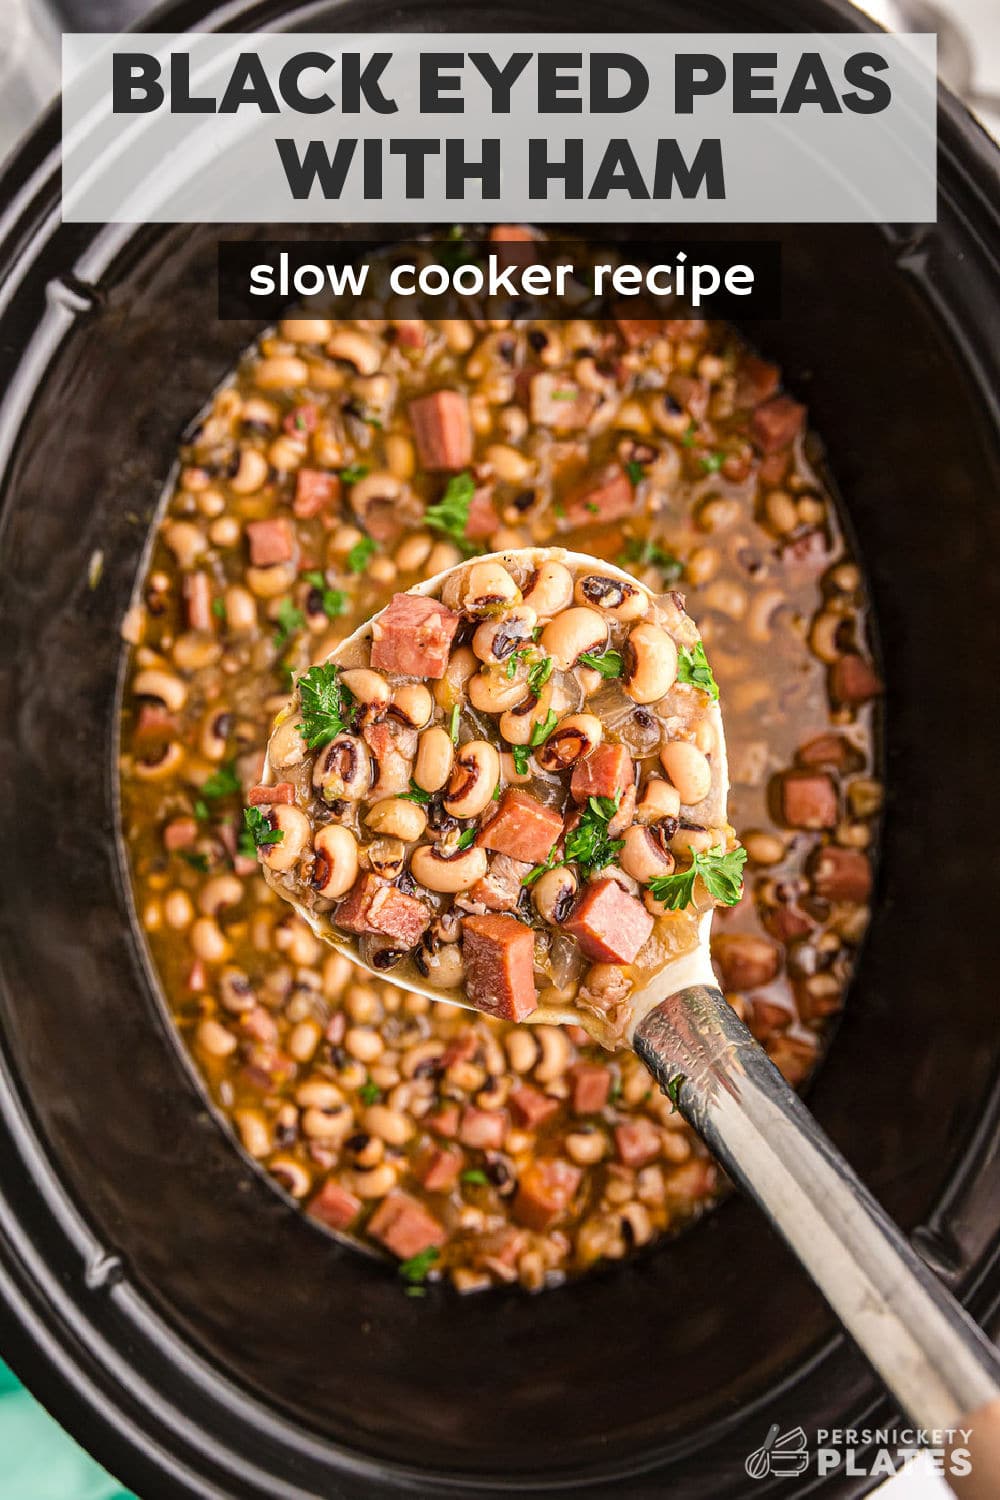 It’s easier than ever to make this classic Slow Cooker Black Eyed Peas for New Year’s this year! Dump dried peas into the crockpot, pour in all of the remaining ingredients, including ham, bacon, broth, and plenty of seasoning, and let the slow cooker do the rest. The results are buttery textures and savory and smoky flavors in a comfort food recipe to start your year off right! | www.persnicketyplates.com